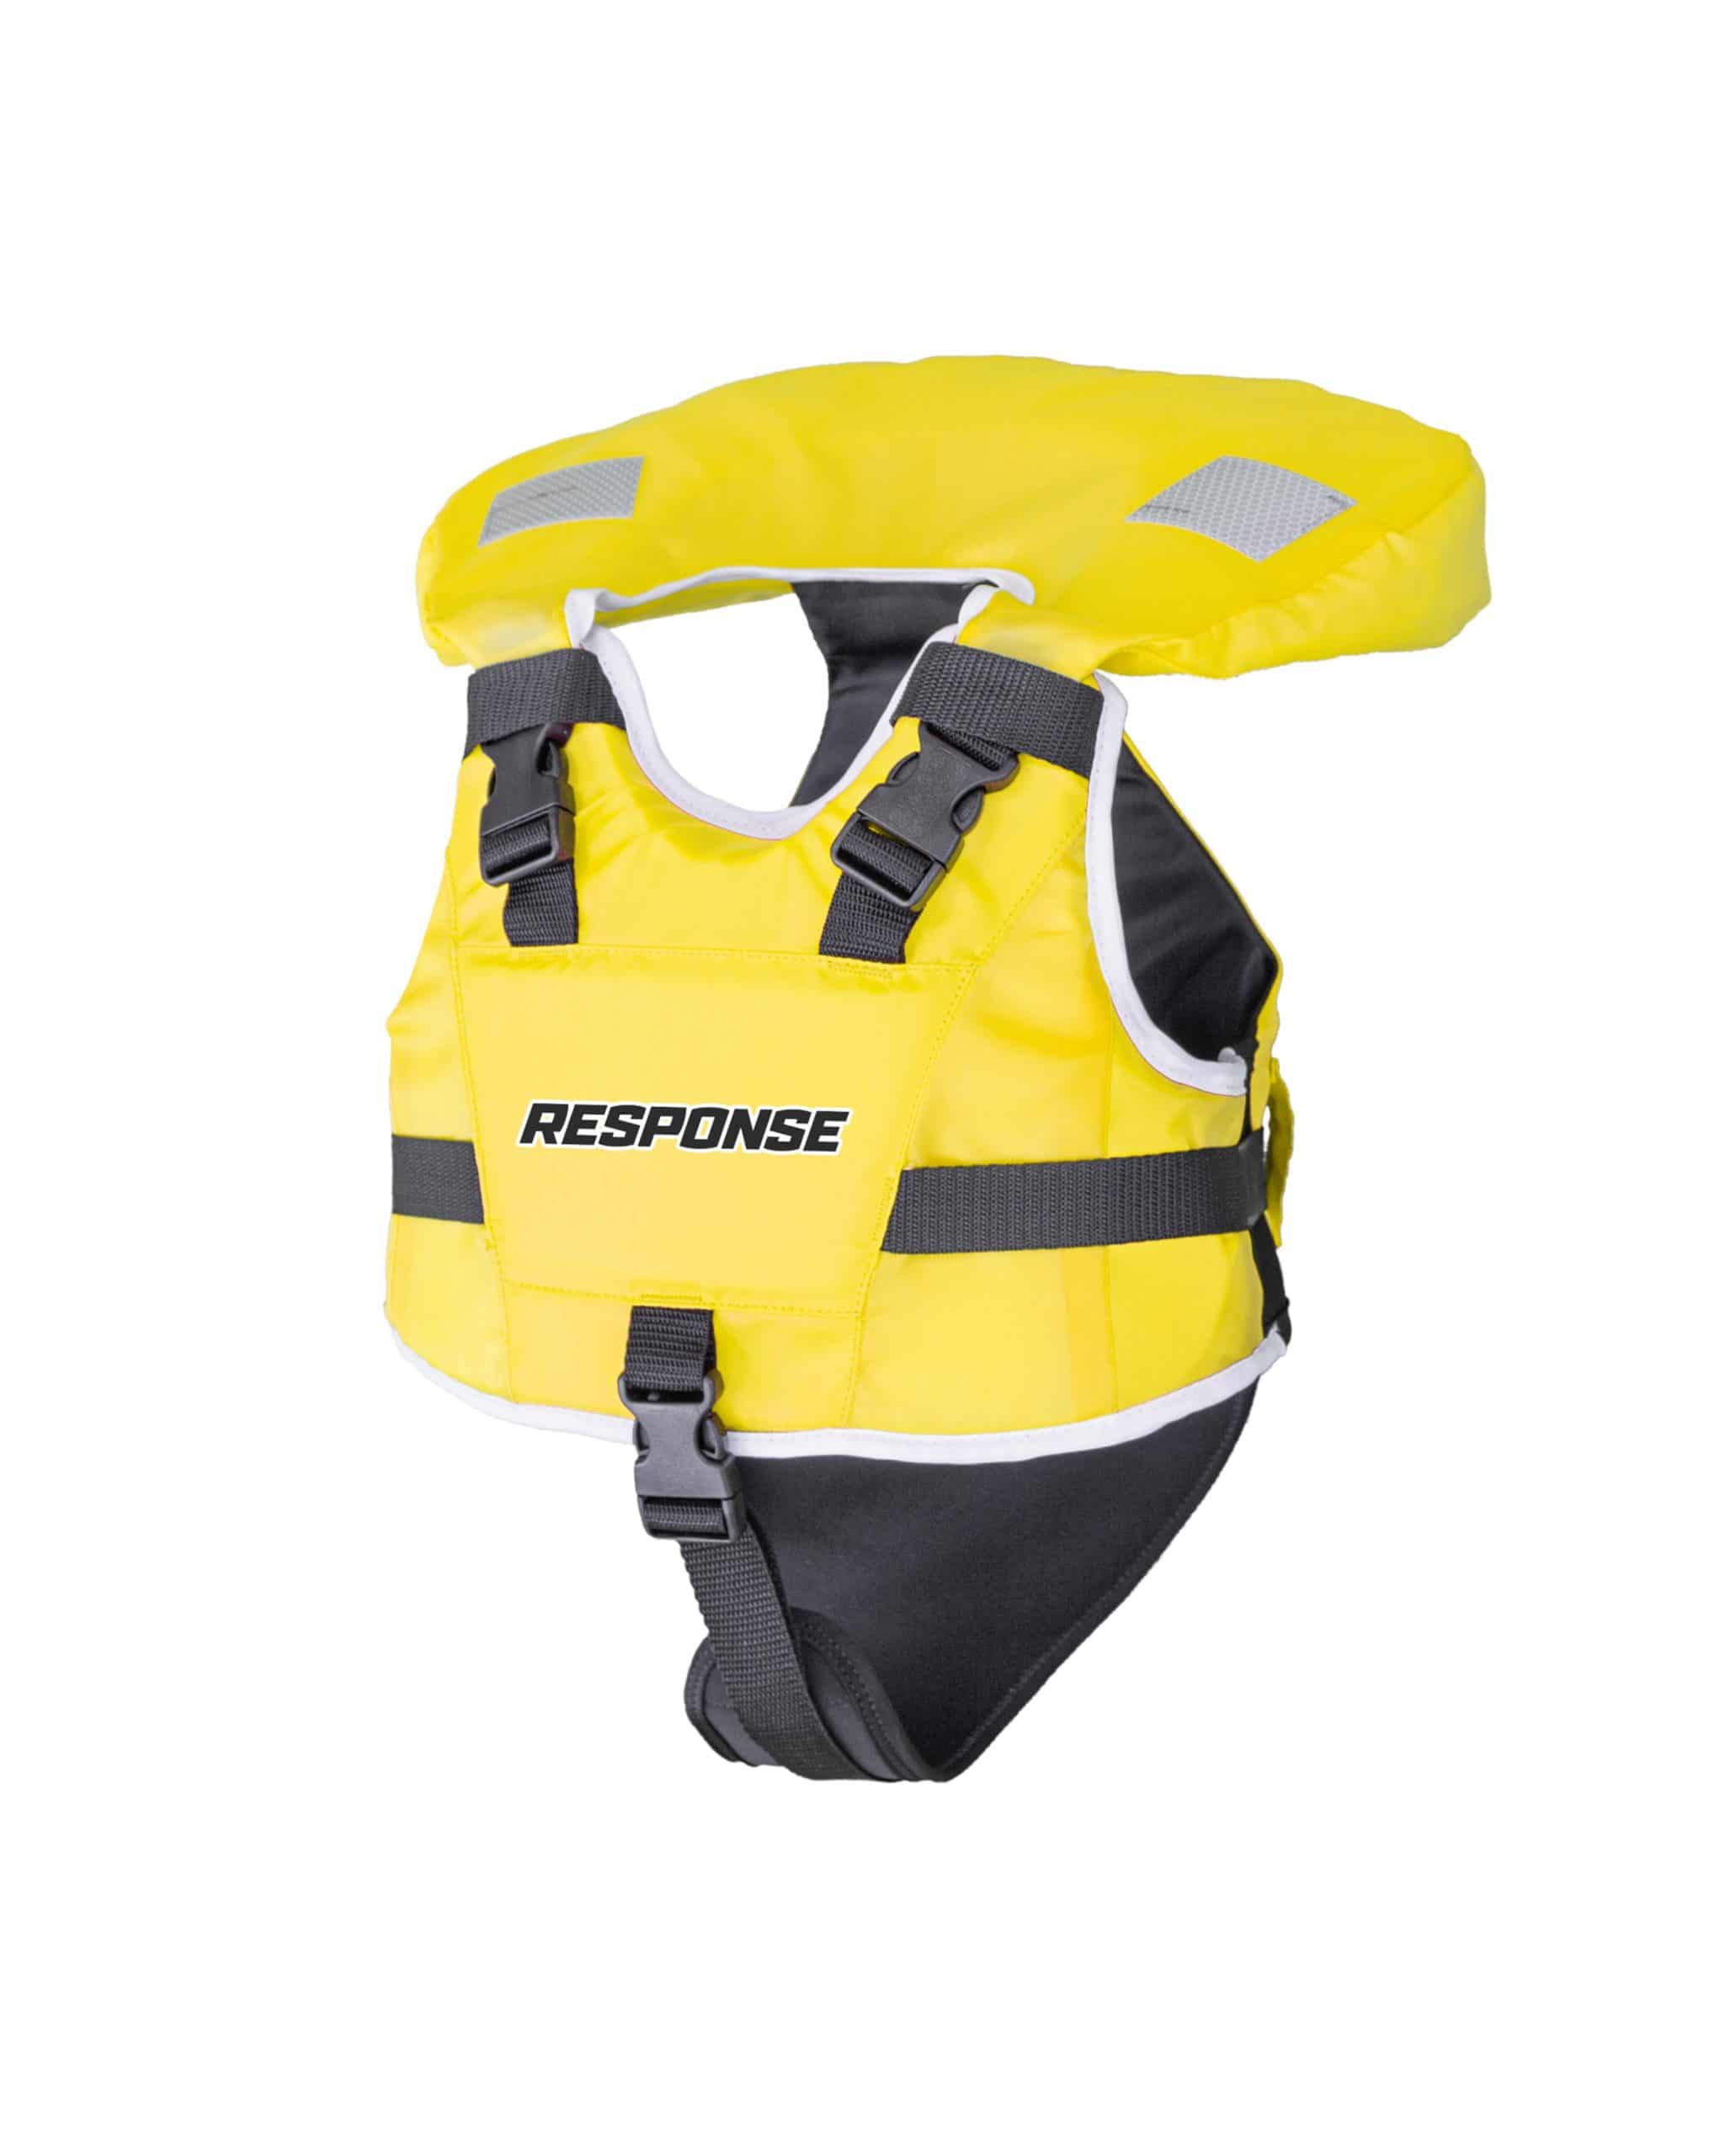 Response B100 Infant Life Jacket -  - Mansfield Hunting & Fishing - Products to prepare for Corona Virus